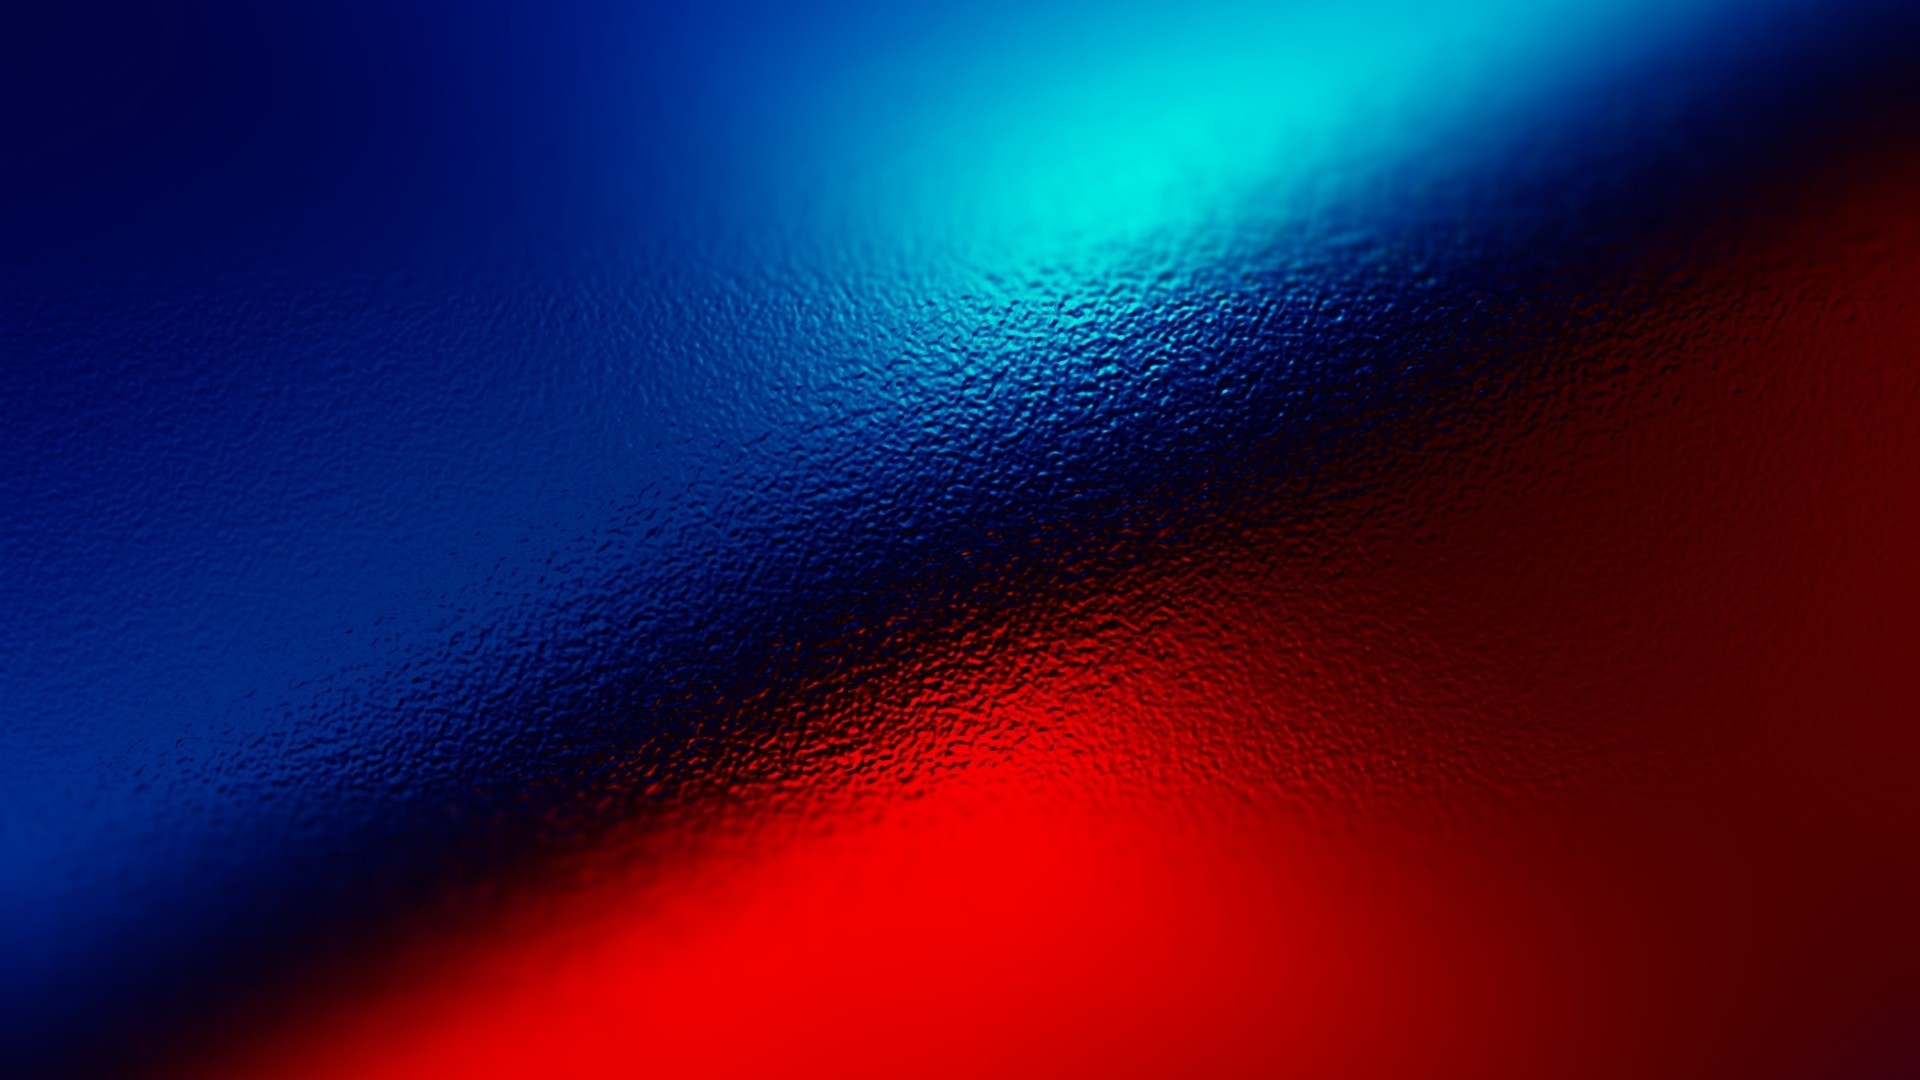 Free Download Abstract Blue Red Colors Wallpapers 1920x1080 For Your